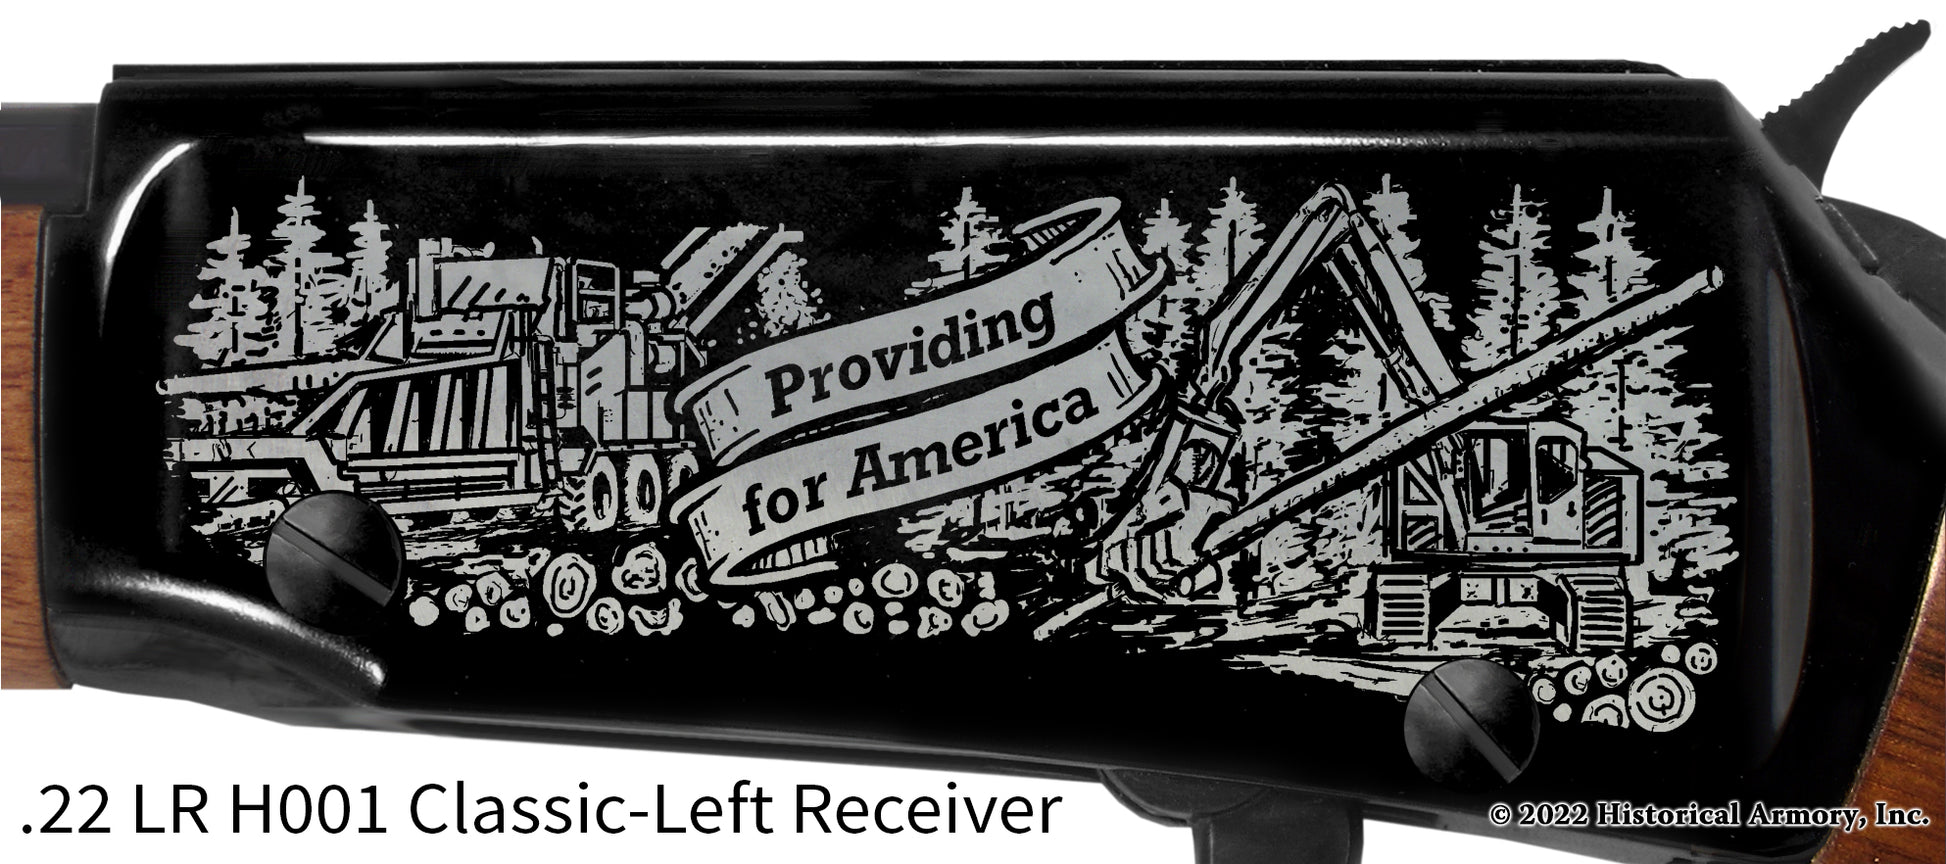 American Logging Industry Limited Edition Engraved Riflelogger providing for America Henry engraved rifle